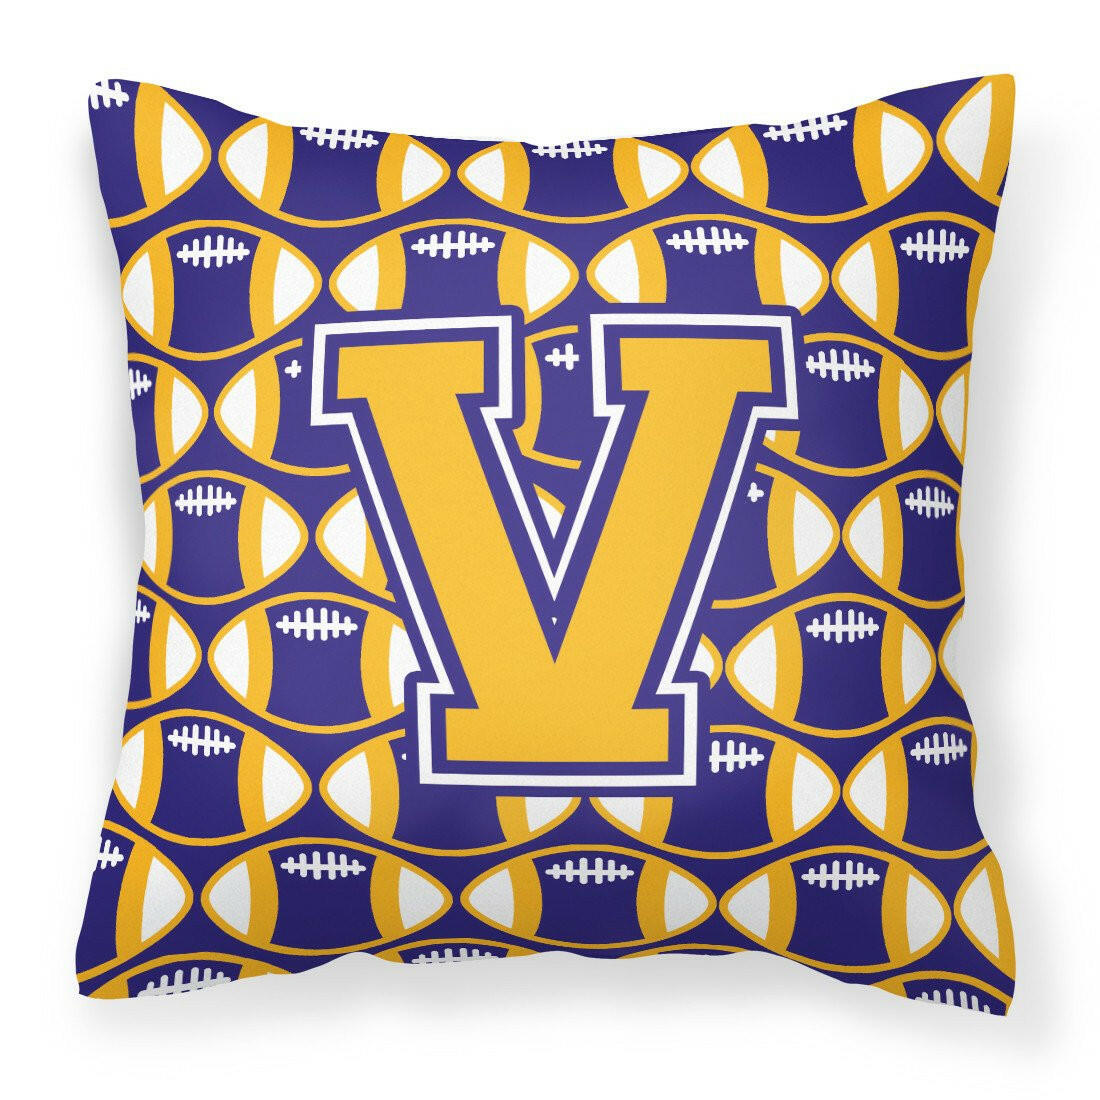 Letter V Football Purple and Gold Fabric Decorative Pillow CJ1064-VPW1414 by Caroline's Treasures